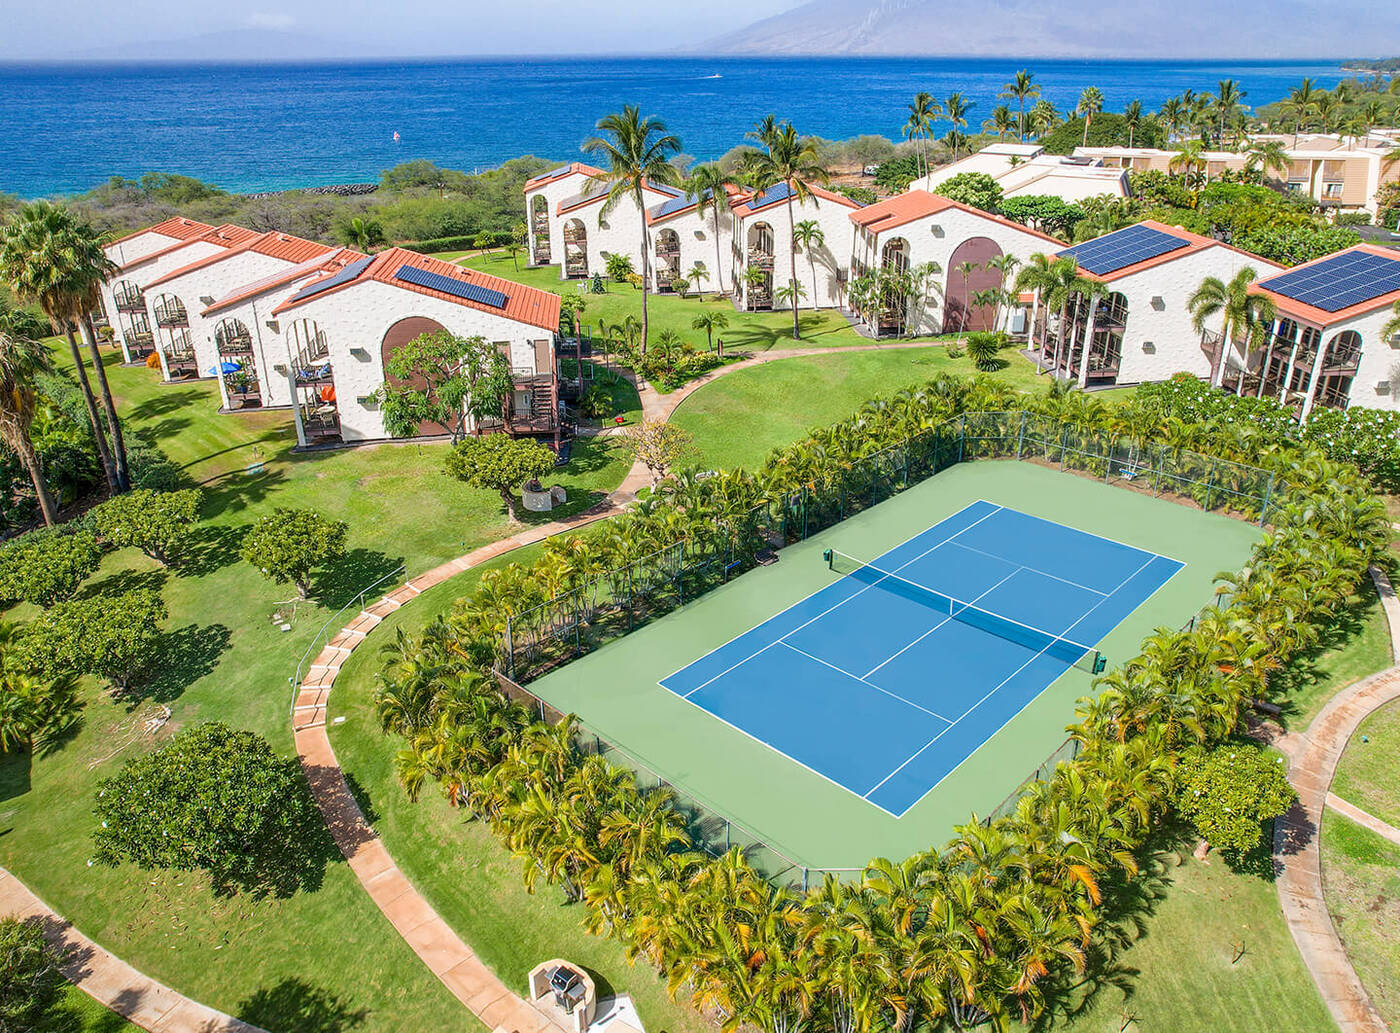 Aerial view of tennis court and resort